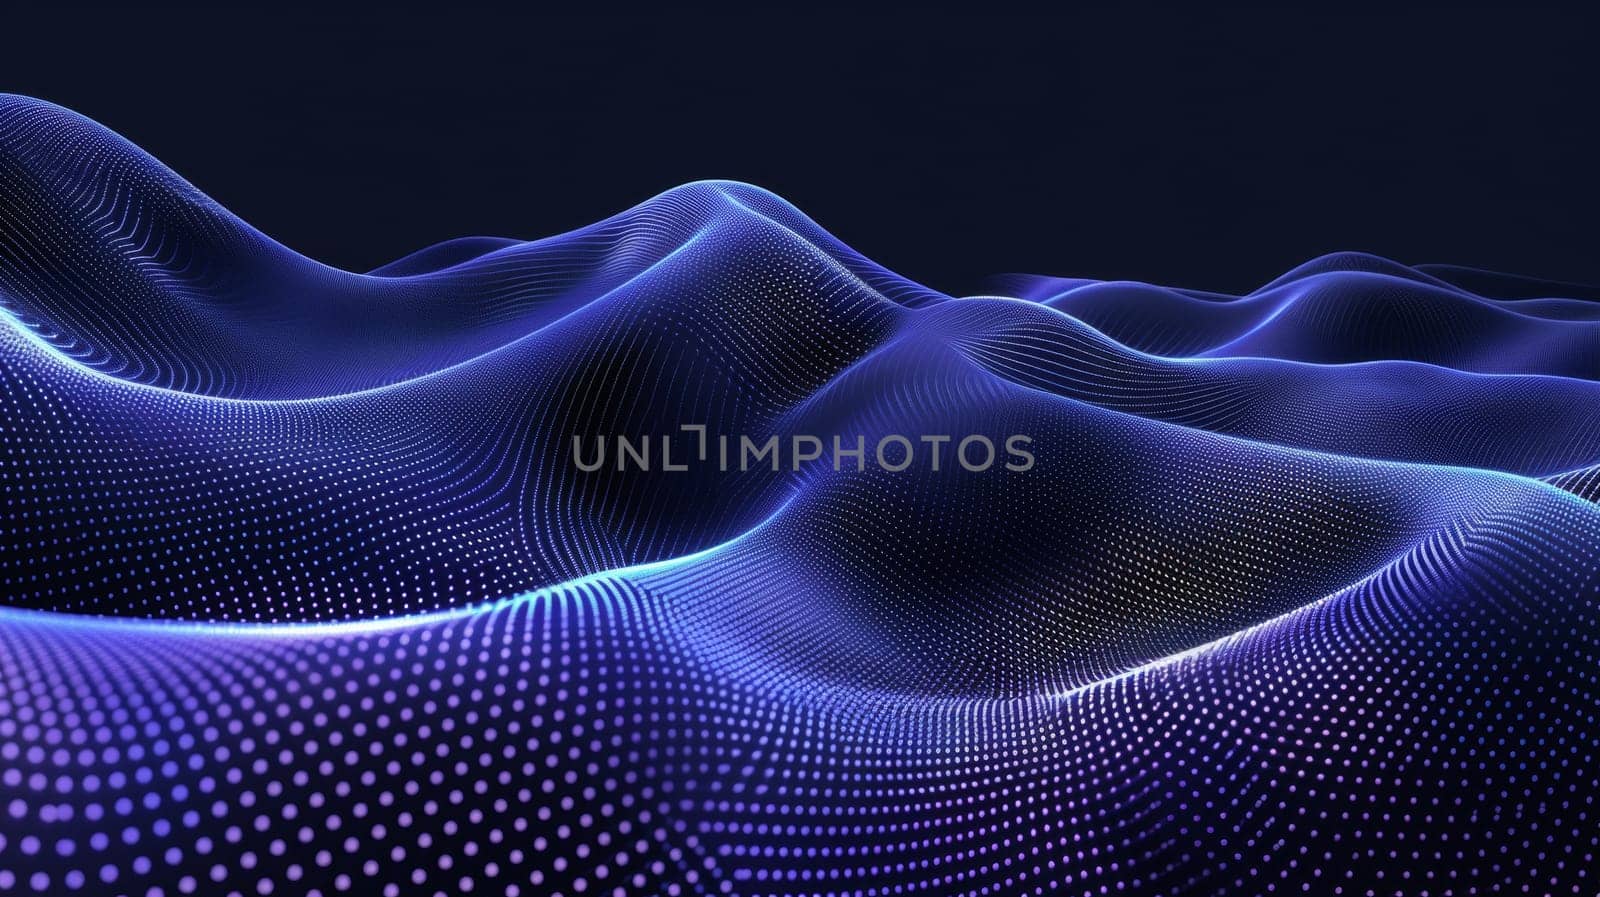 A computer generated image of a wave pattern on the surface